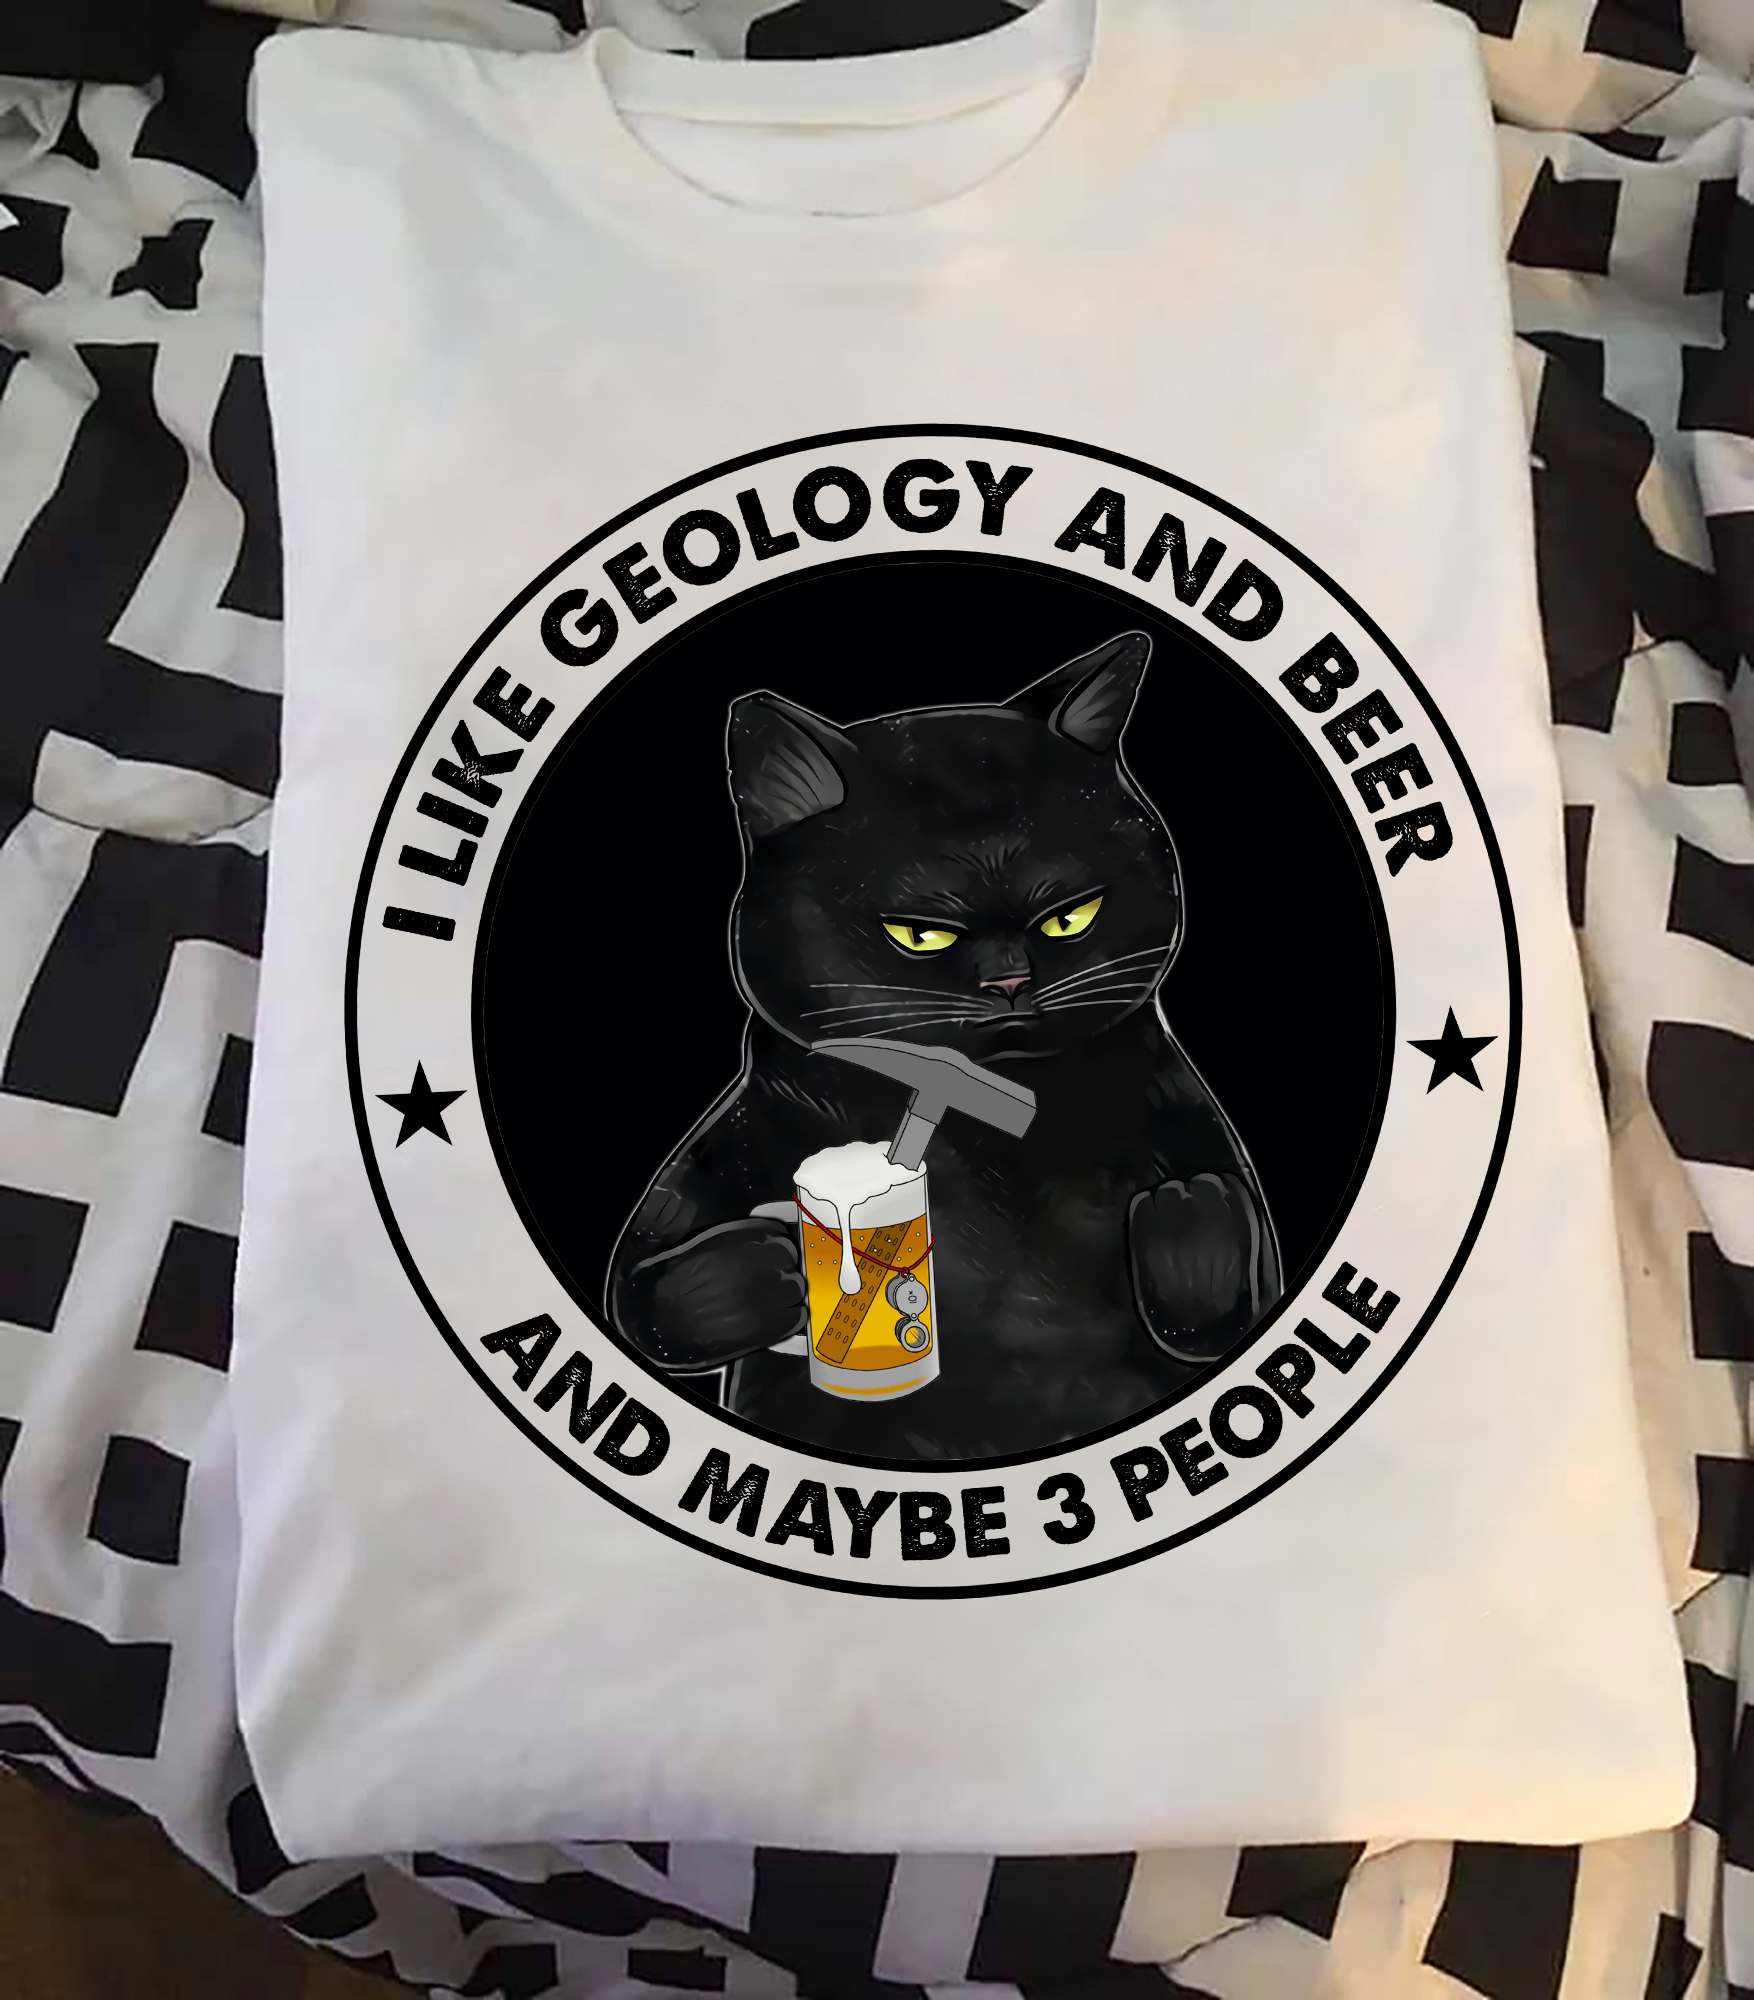 I like geology and beer and maybe 3 people - Beer lover